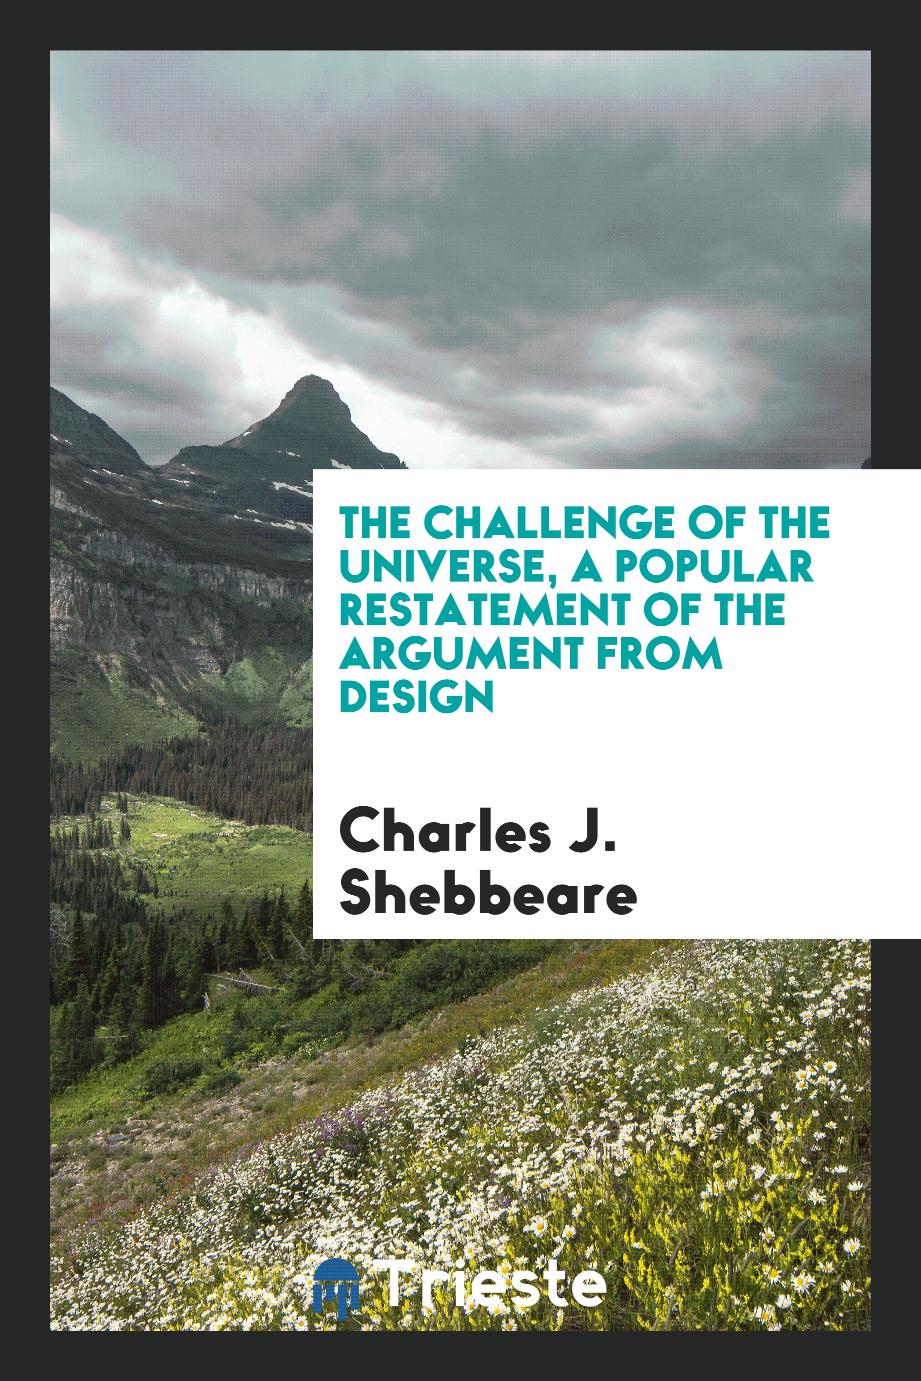 The challenge of the universe, a popular restatement of the argument from design